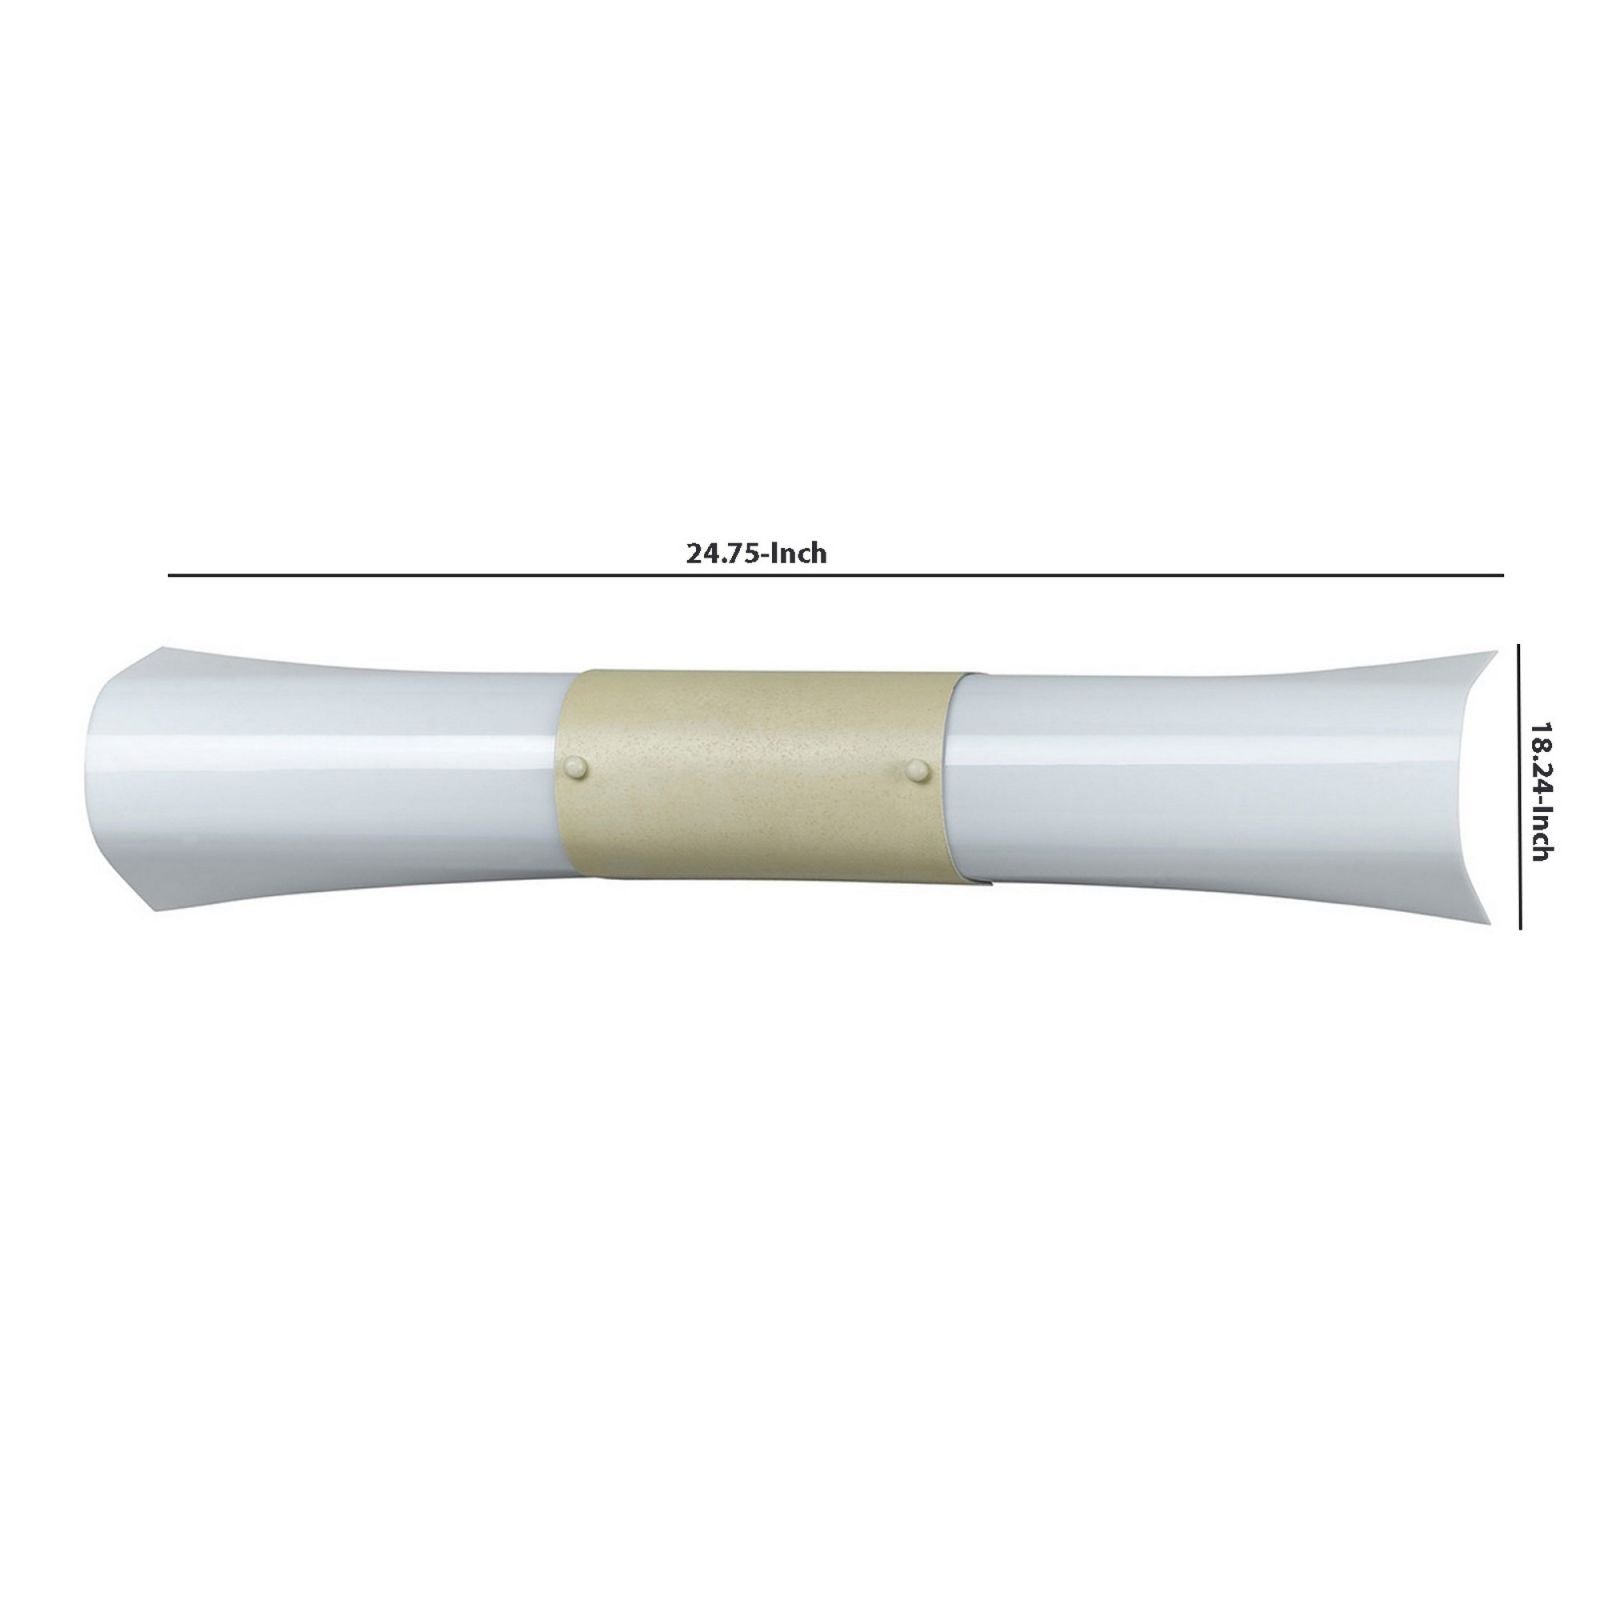 Elongated Vanity Light With Frosted Acrylic Plate, Set Of 4,White And Beige By Benzara